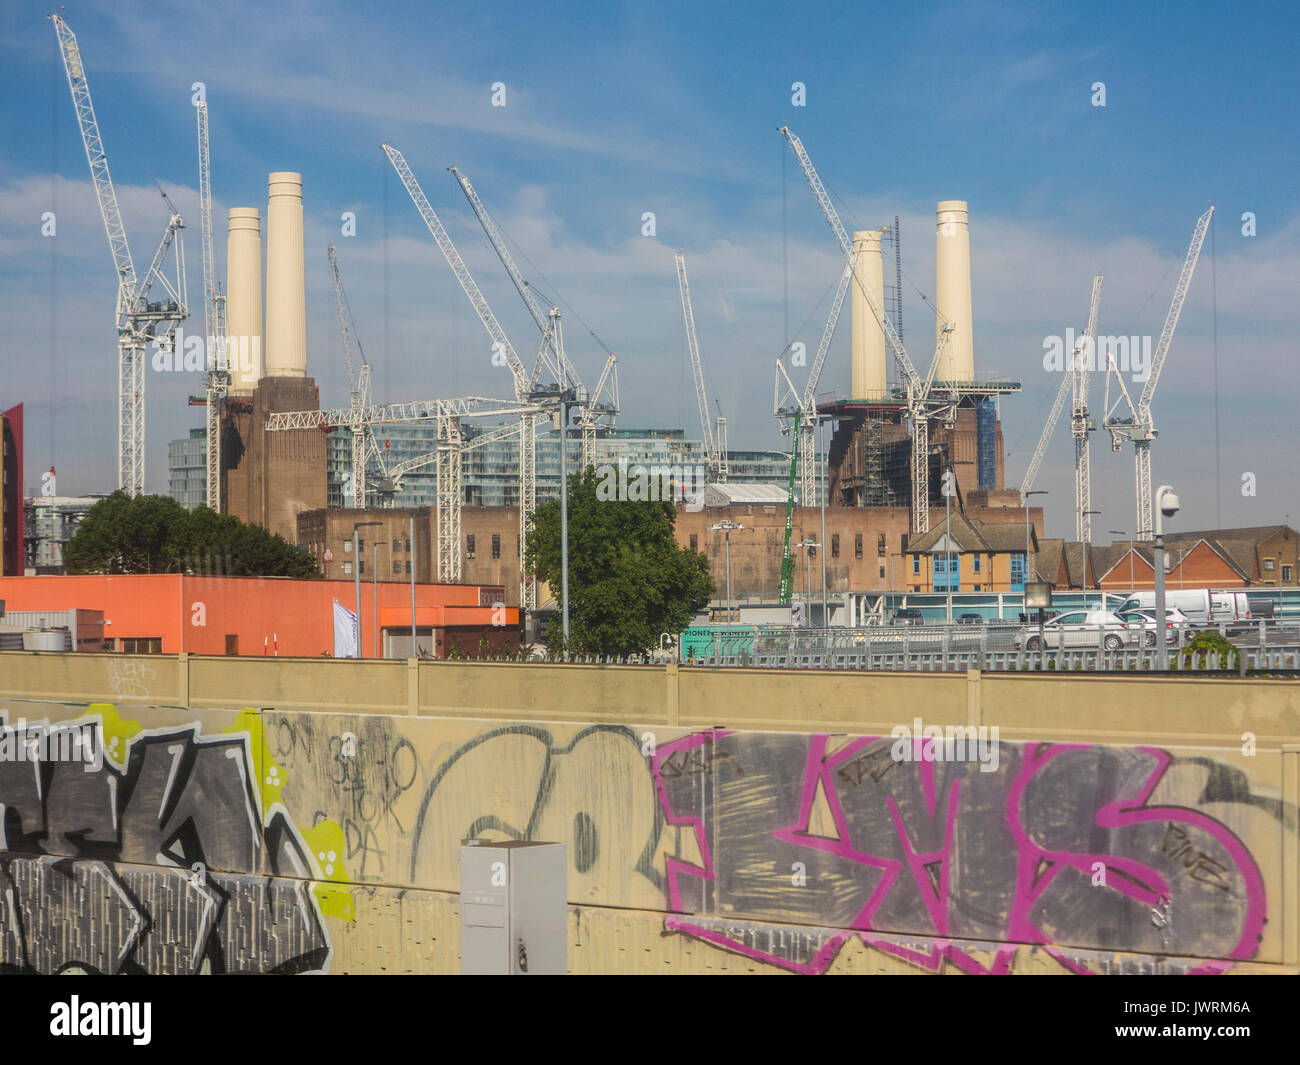 An unusual view of Battersea Power Station with a foreground of urban graffiti Stock Photo